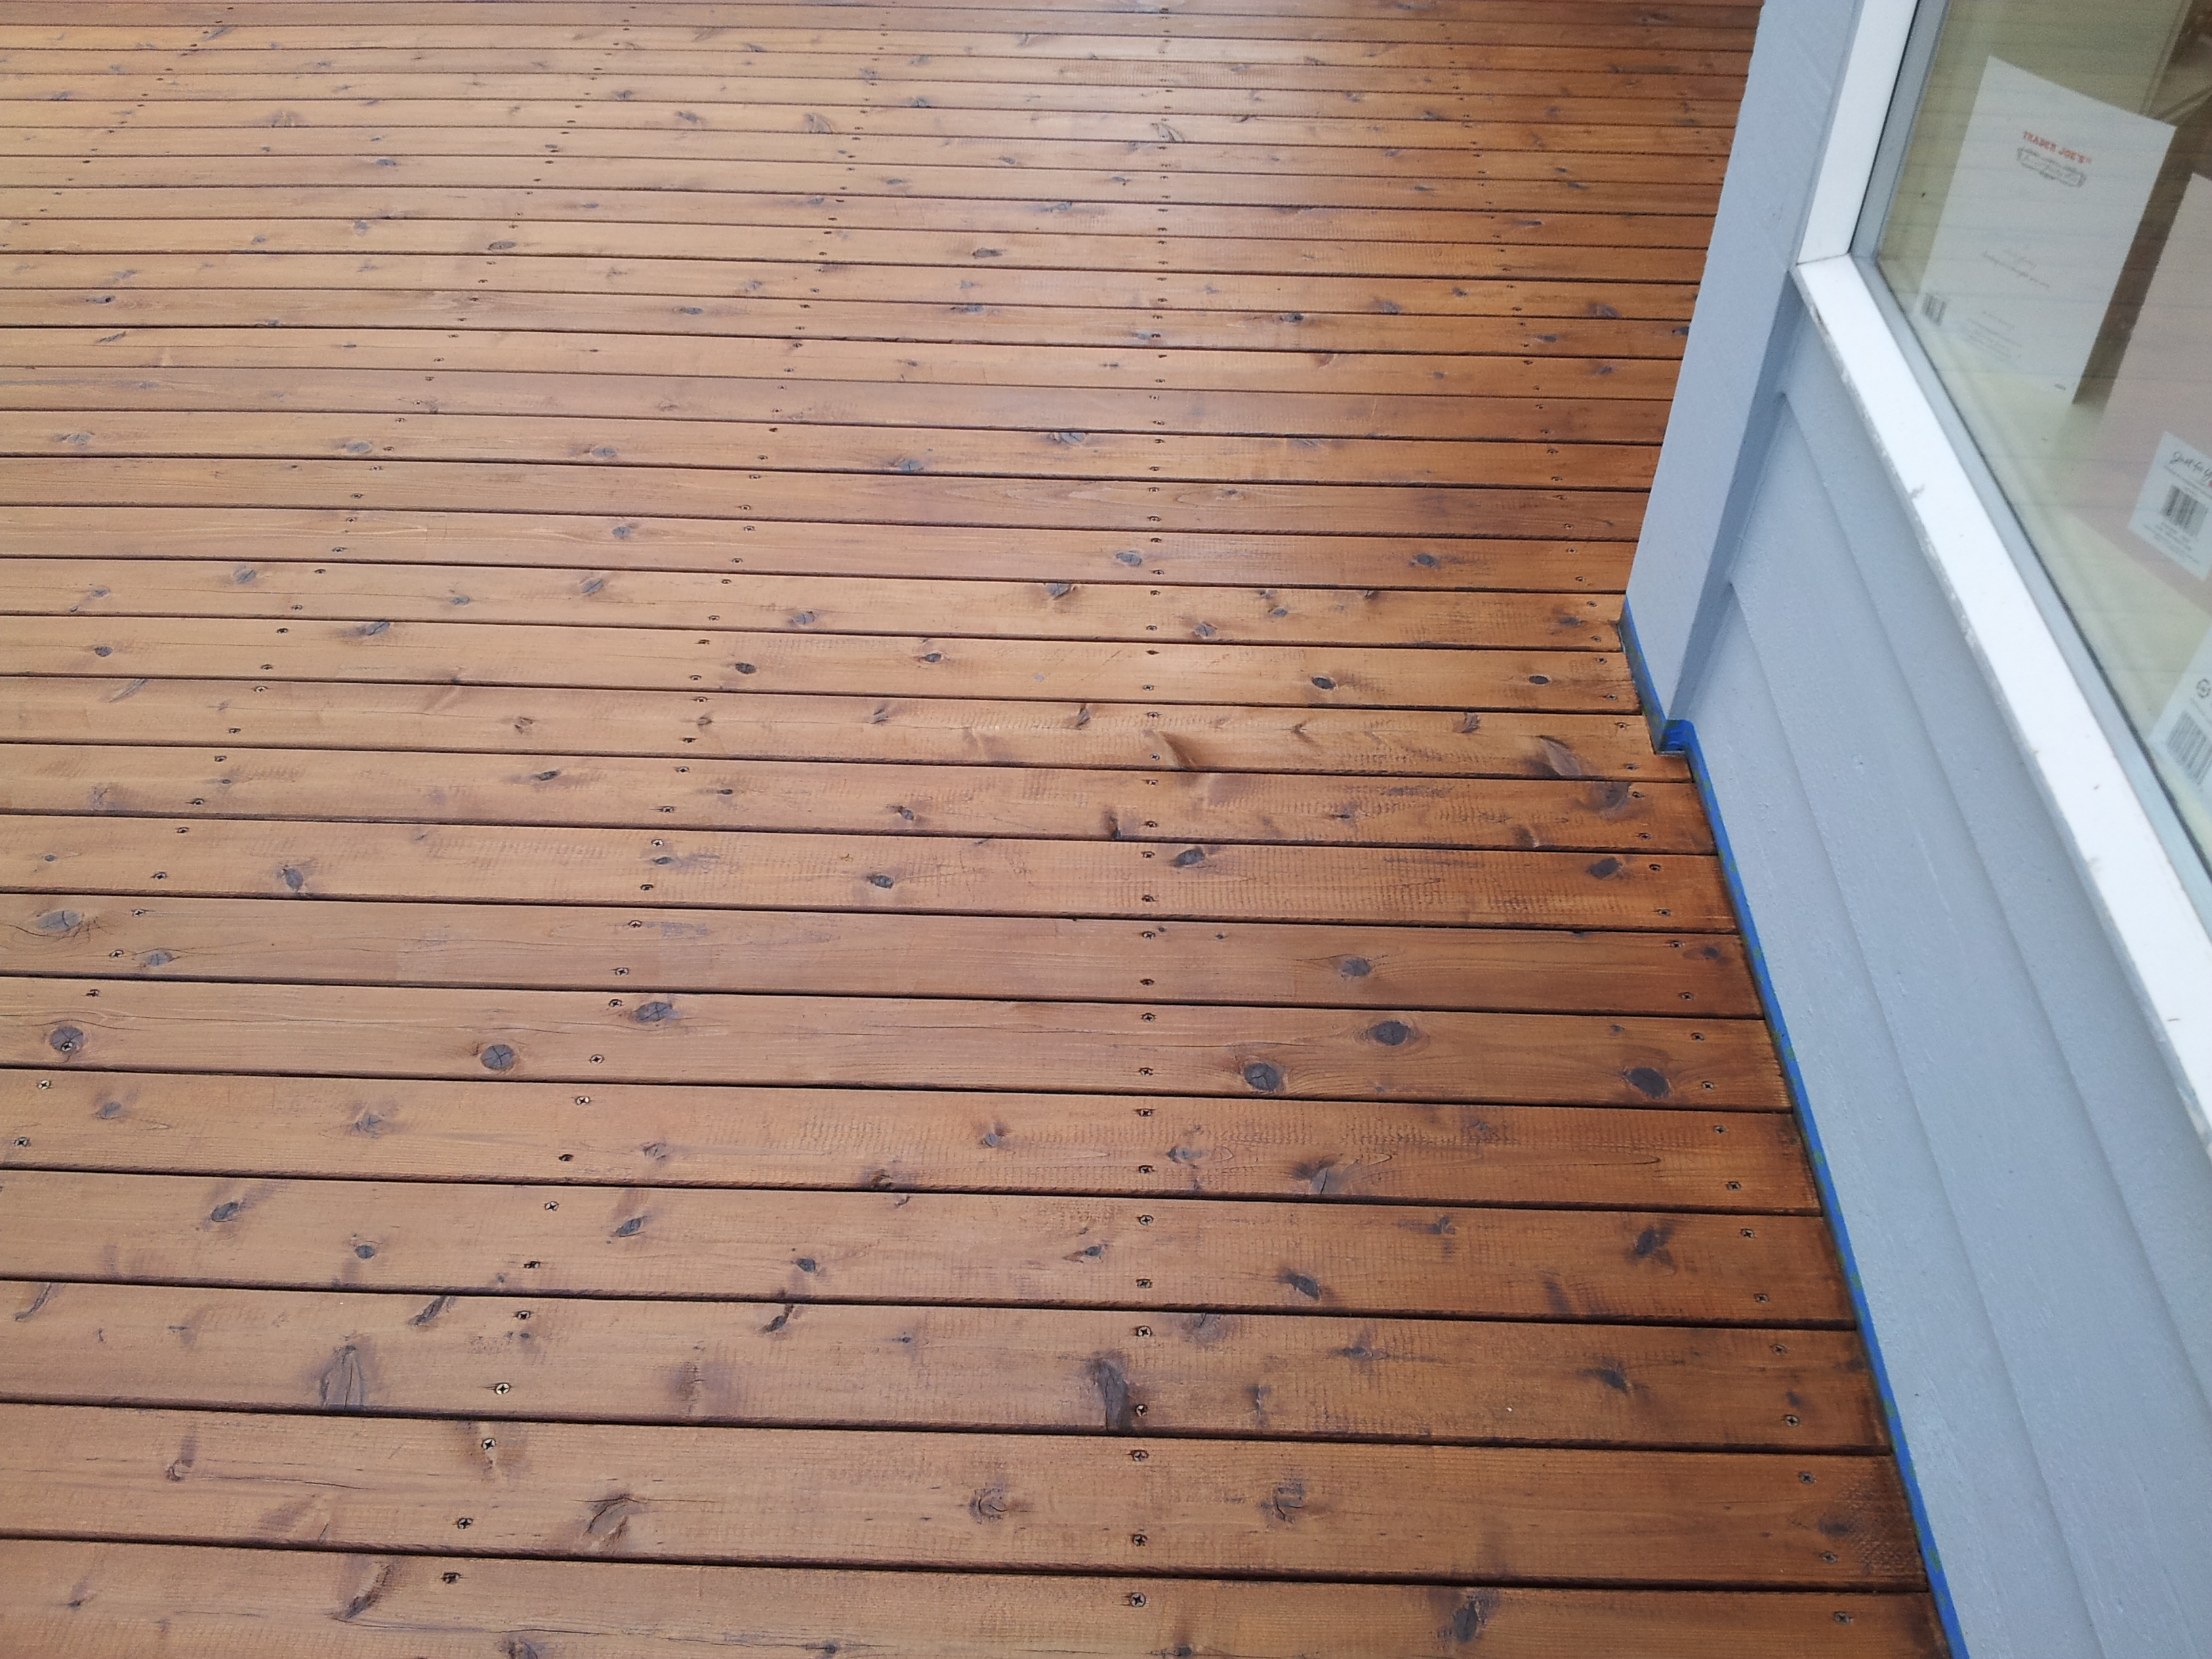 Oil Based Deck Stains 2019 Best Deck Stain Reviews Ratings inside measurements 3264 X 2448